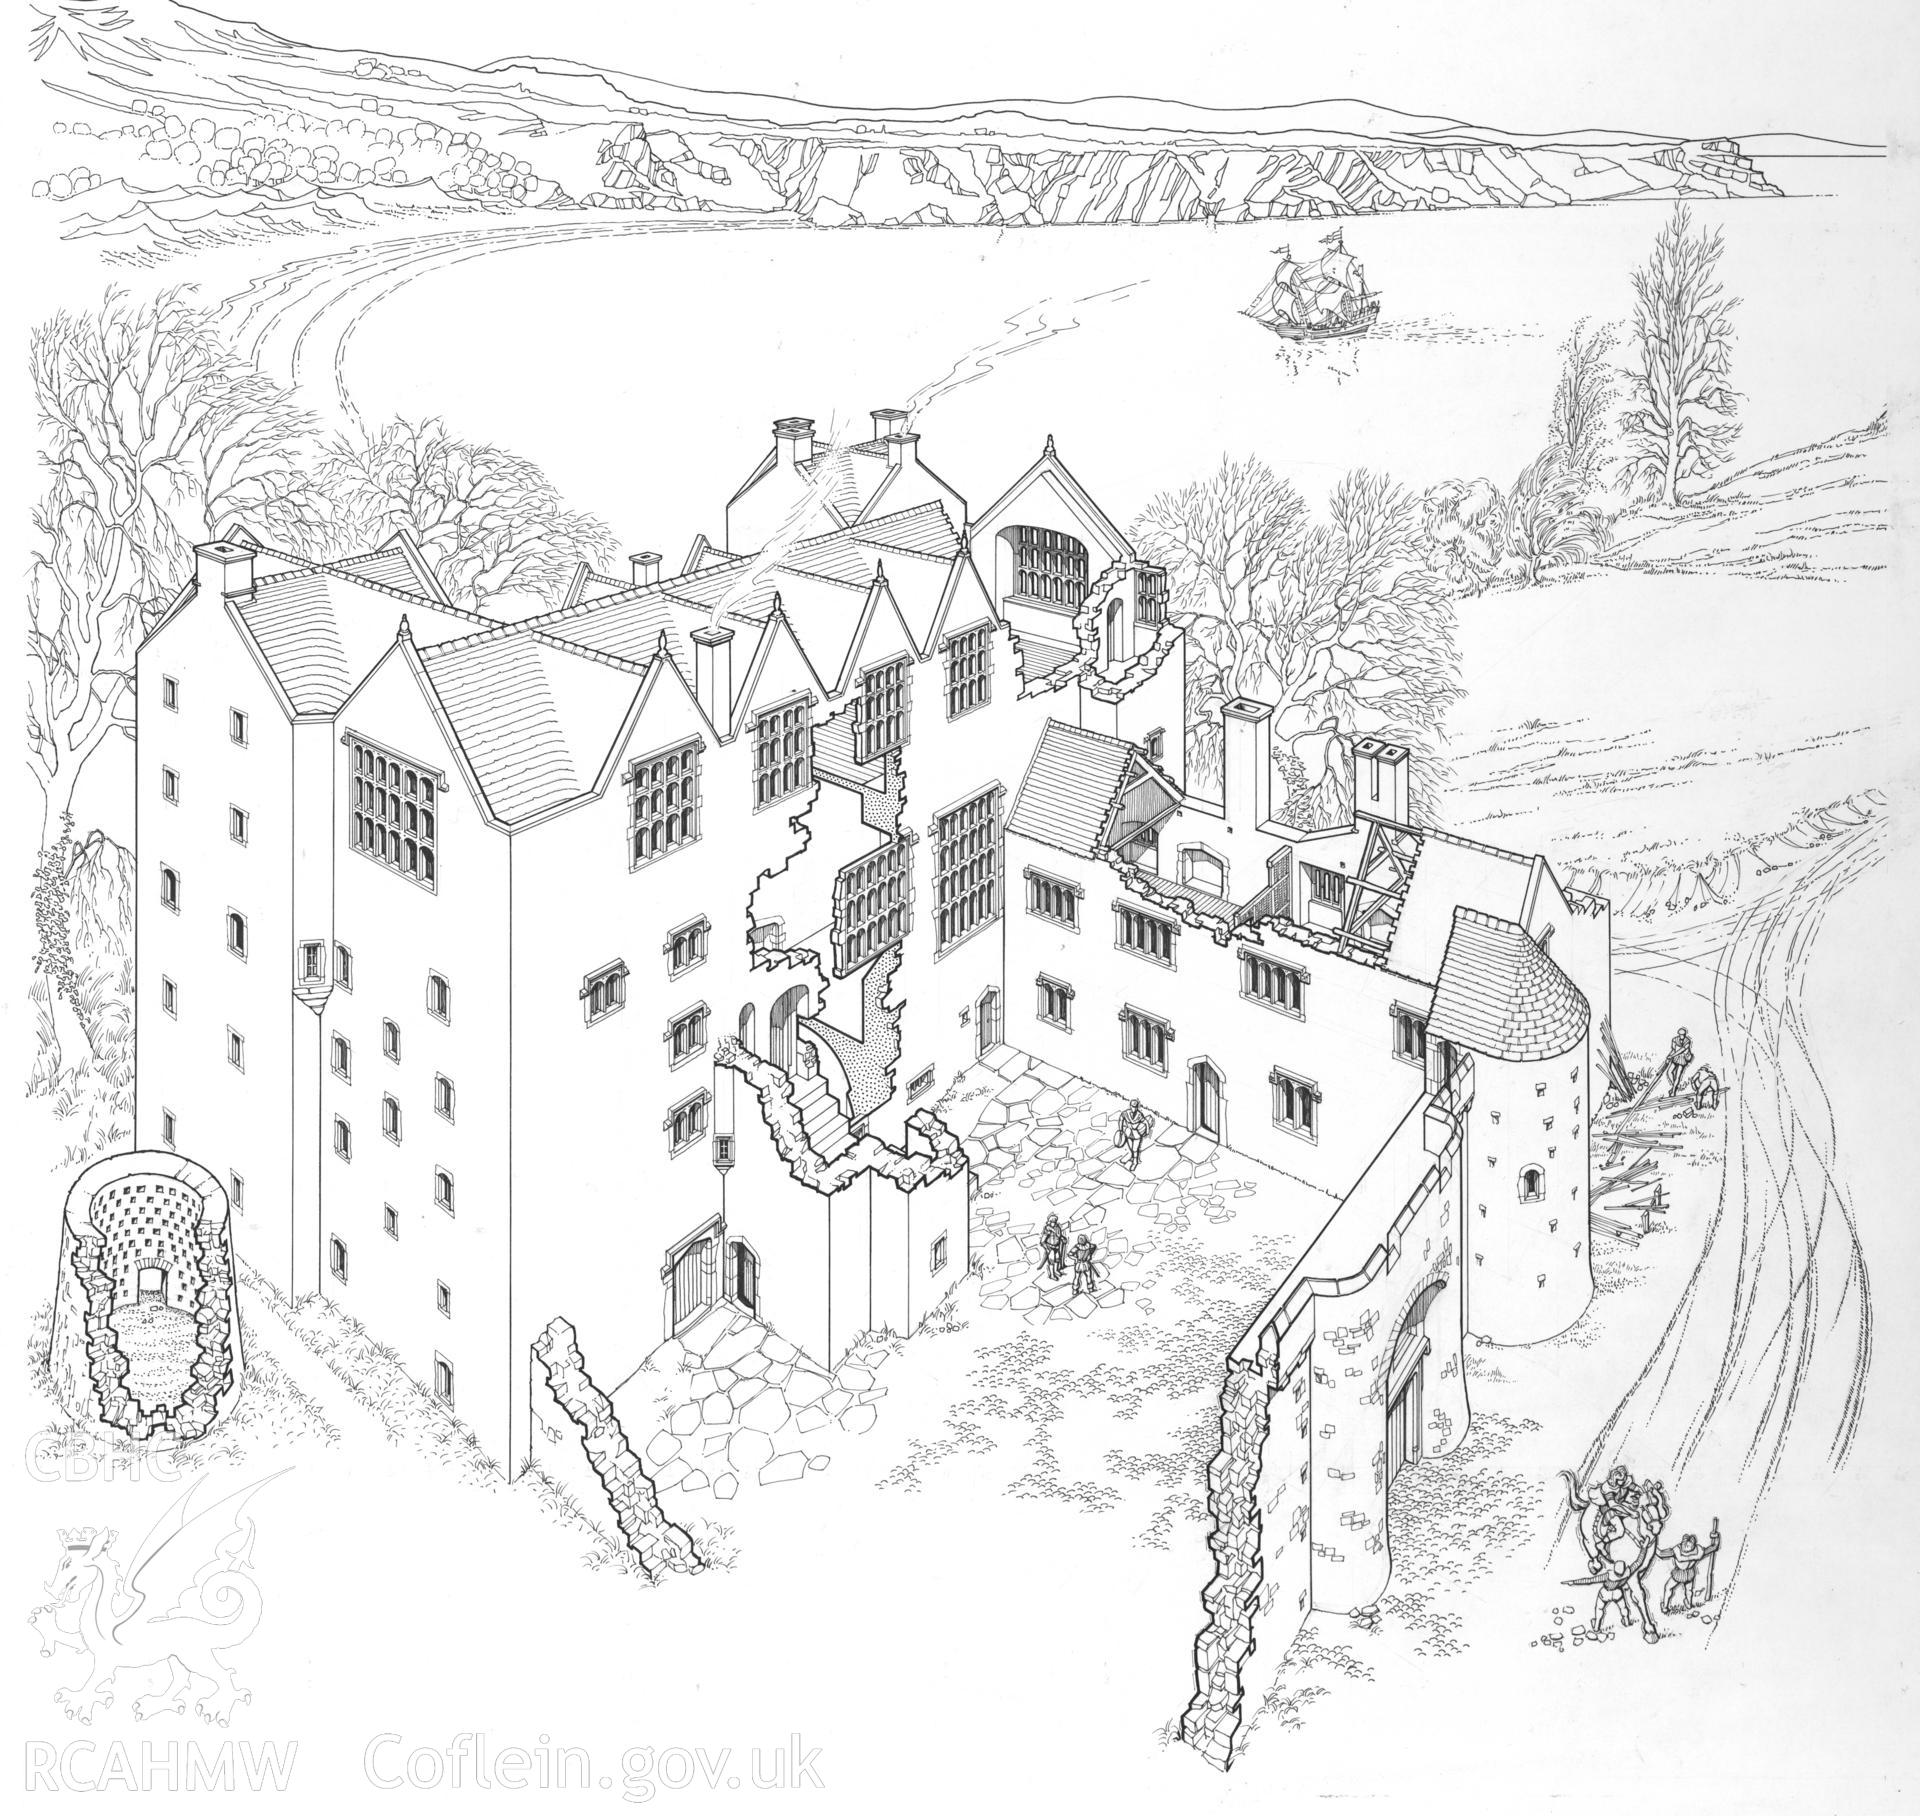 RCAHMW drawing showing cutaway view of Oxwich Castle, Glamorgan, published in Glamorgan IV, fig 7.